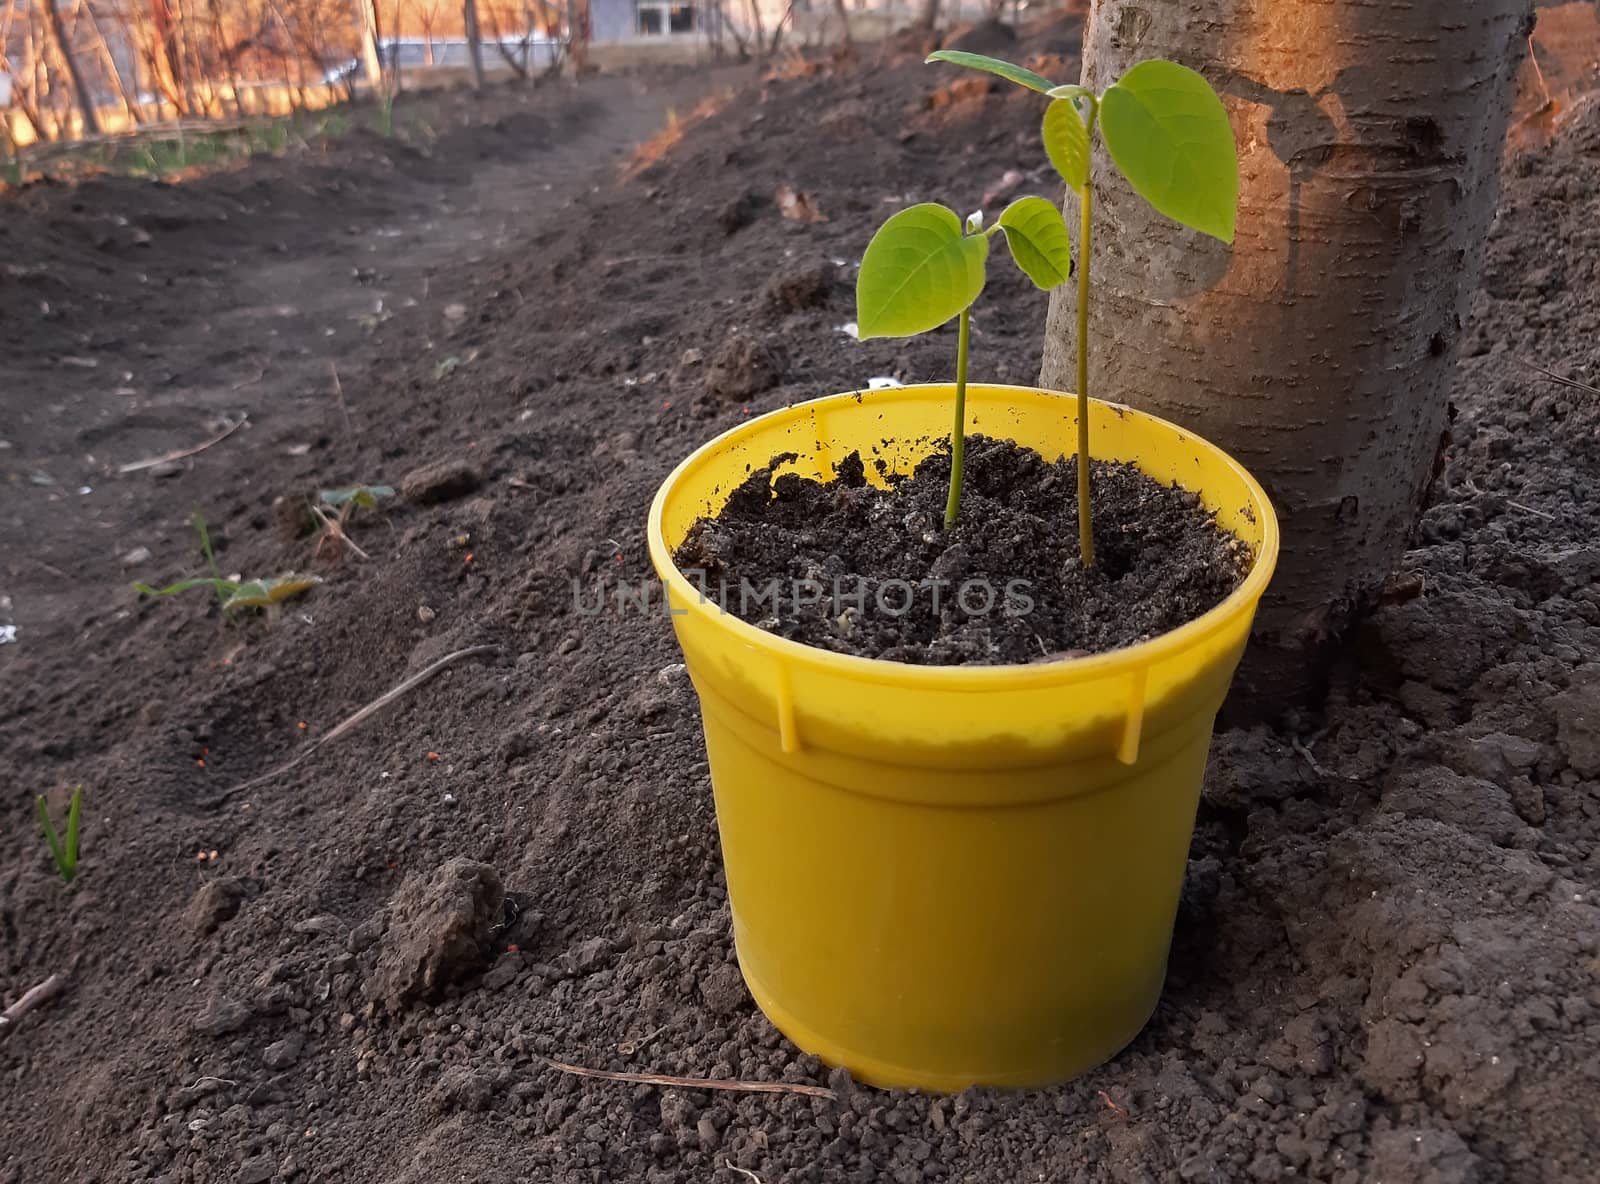 A young plant germinated in the yellow pot.